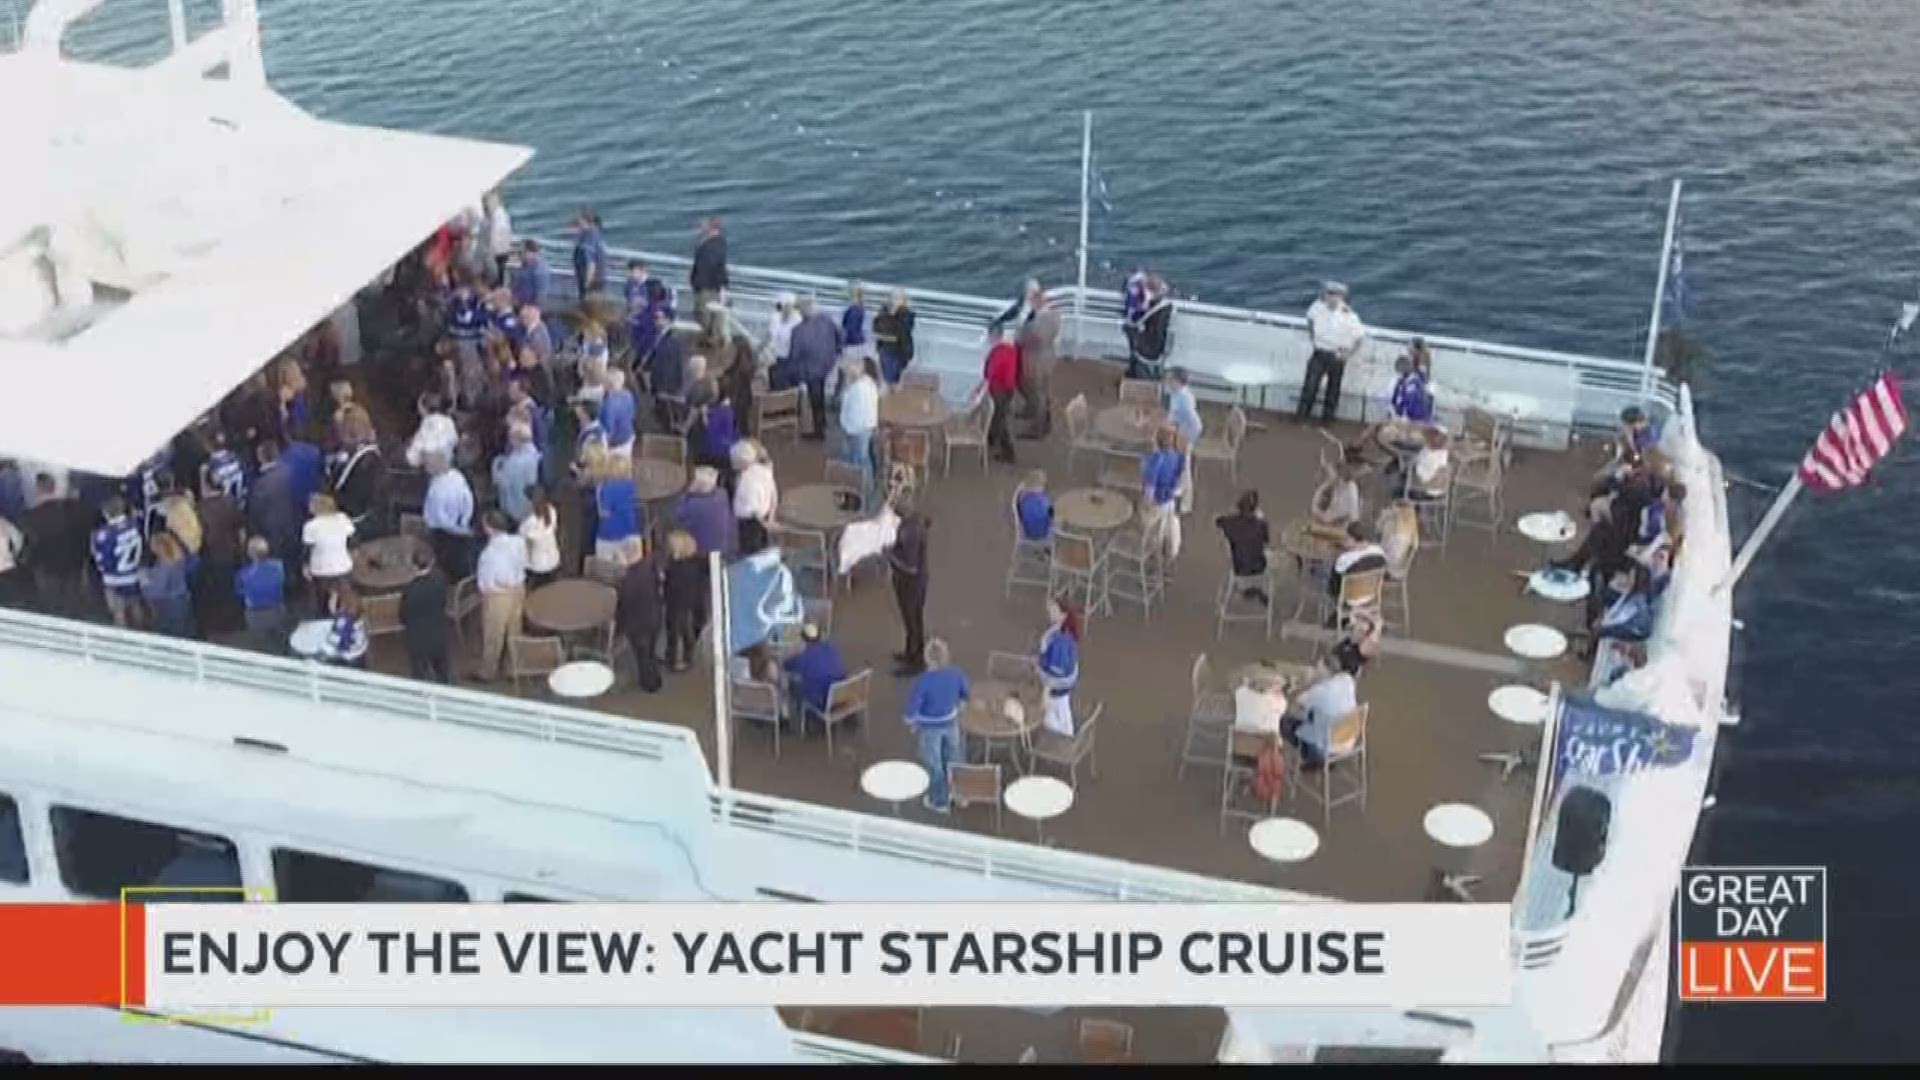 Yacht Starship Cruises has black Friday deals you can’t miss.